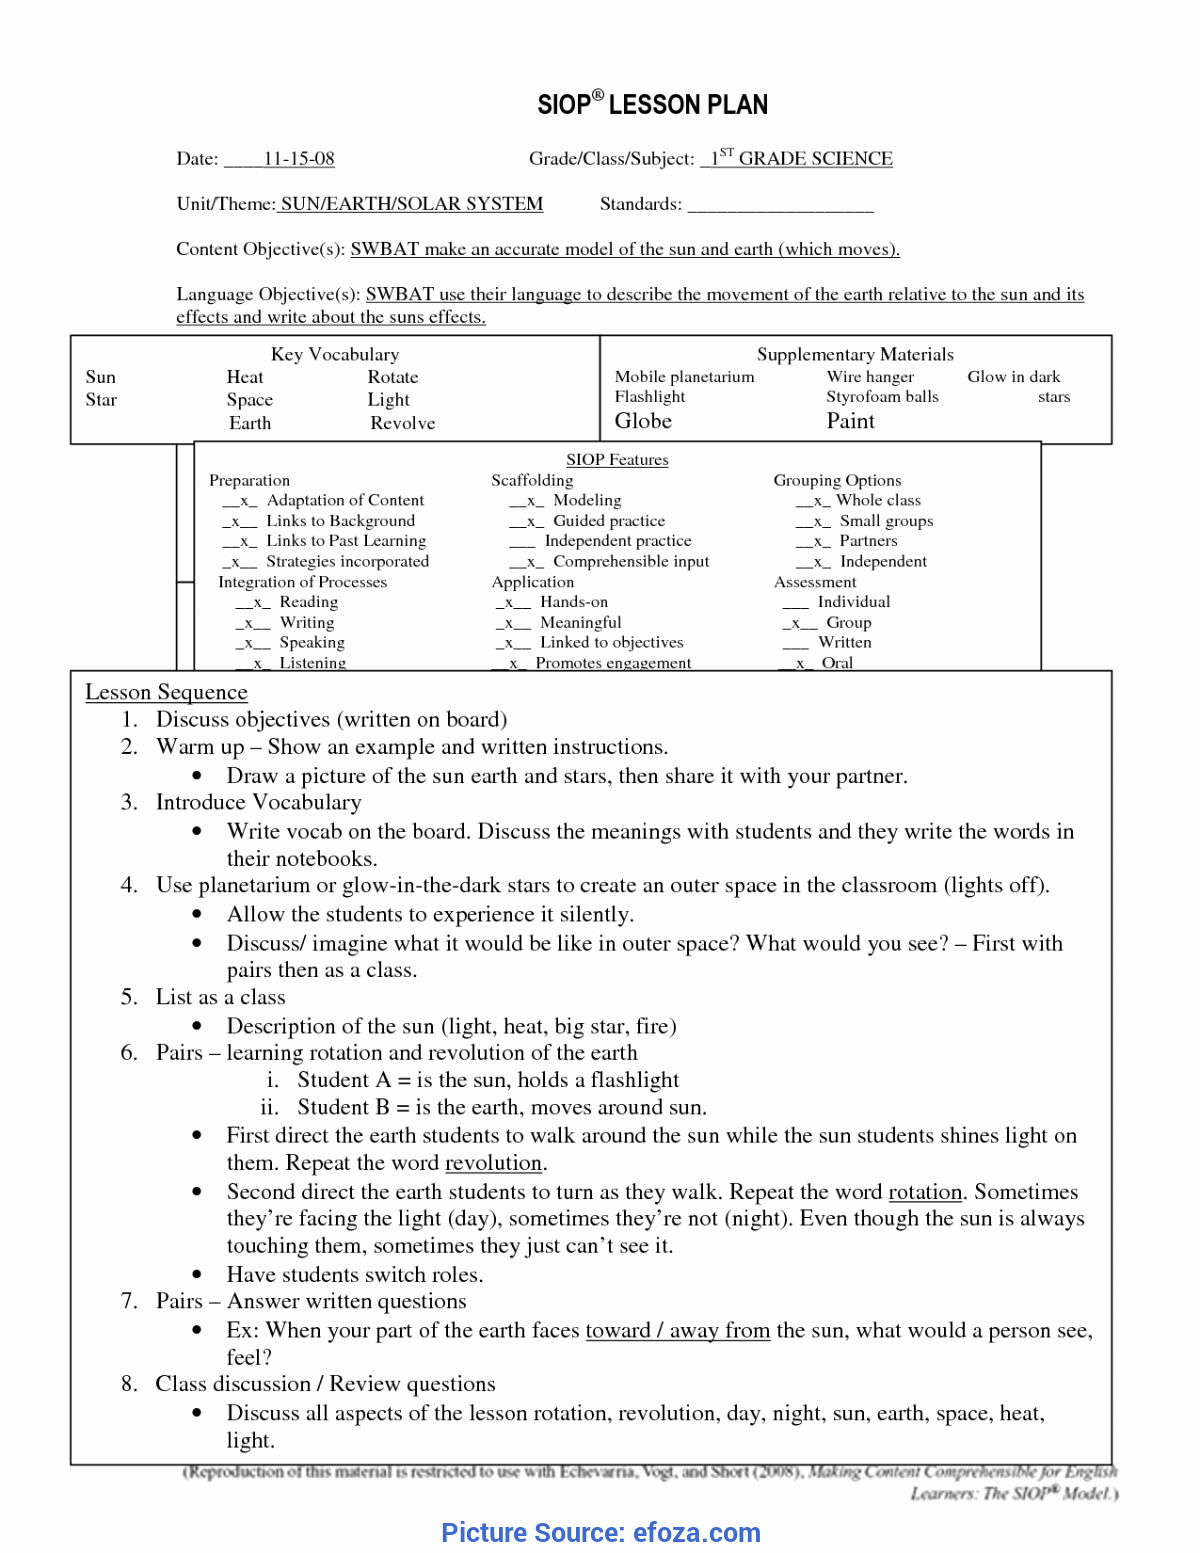 Siop Lesson Plan Template 1 Lovely Good Road to Reading Lesson Plans 1st Grade 1 Teachers